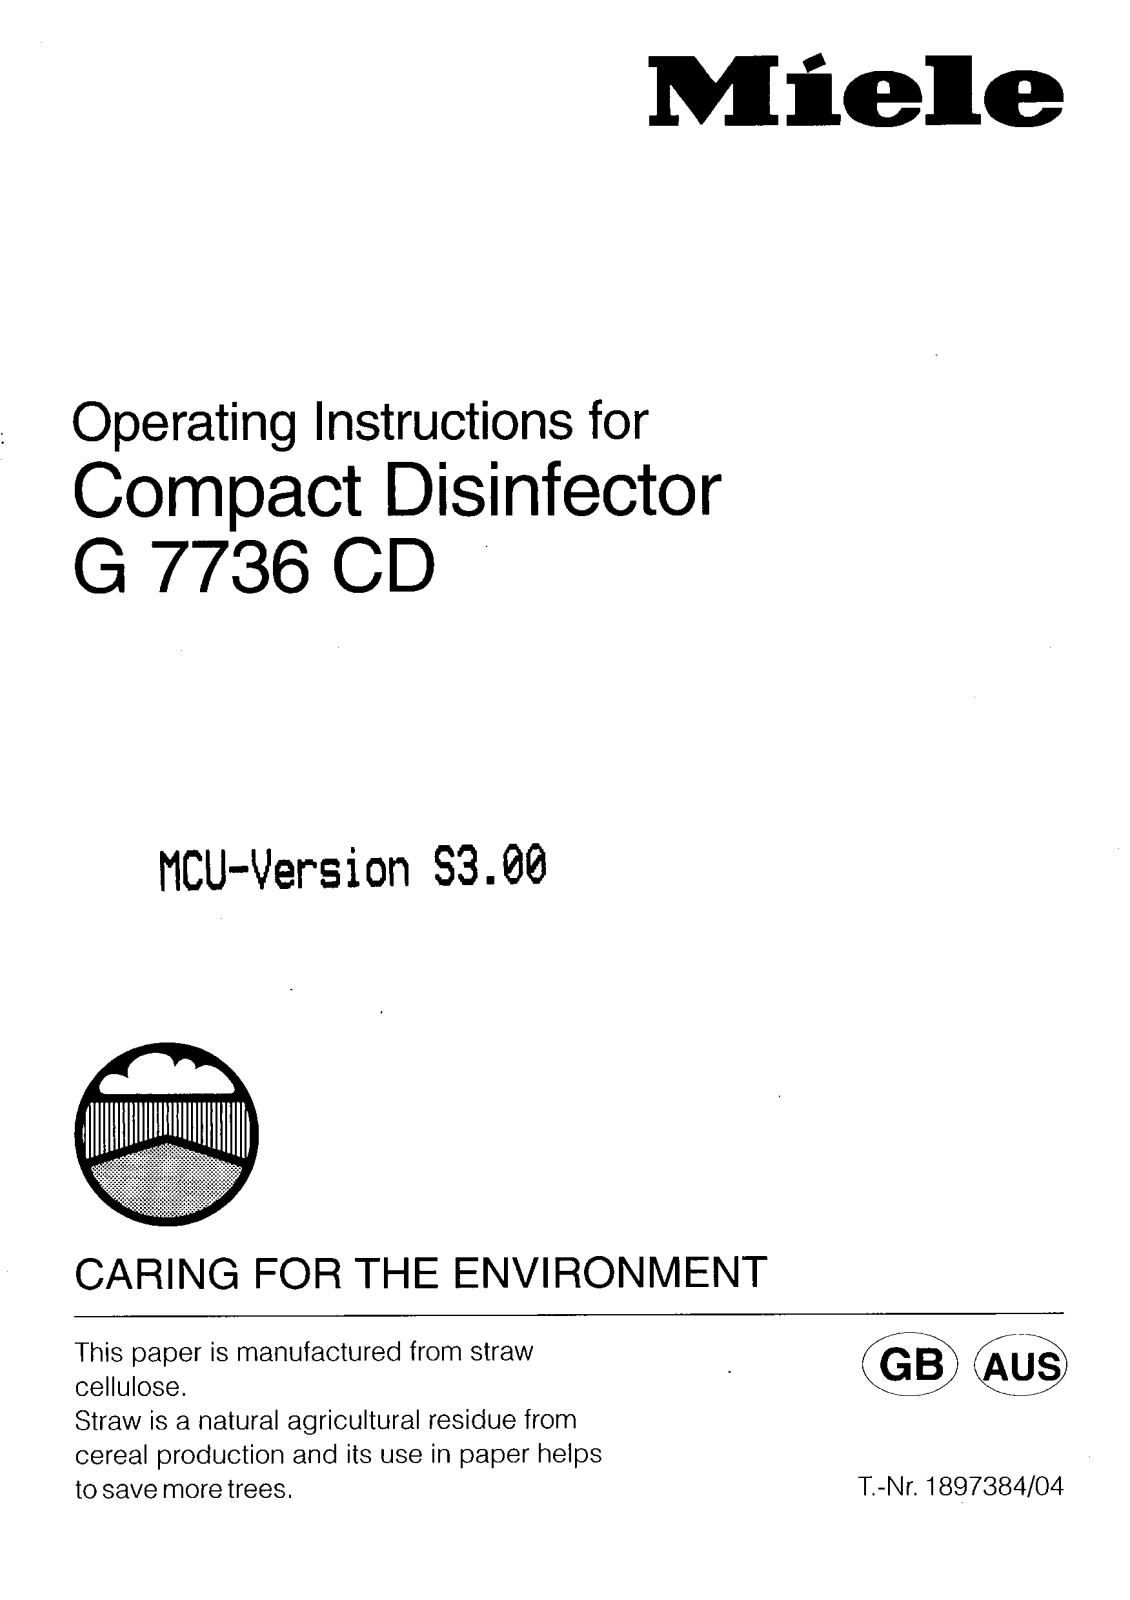 Miele G 7736 CD Operating instructions